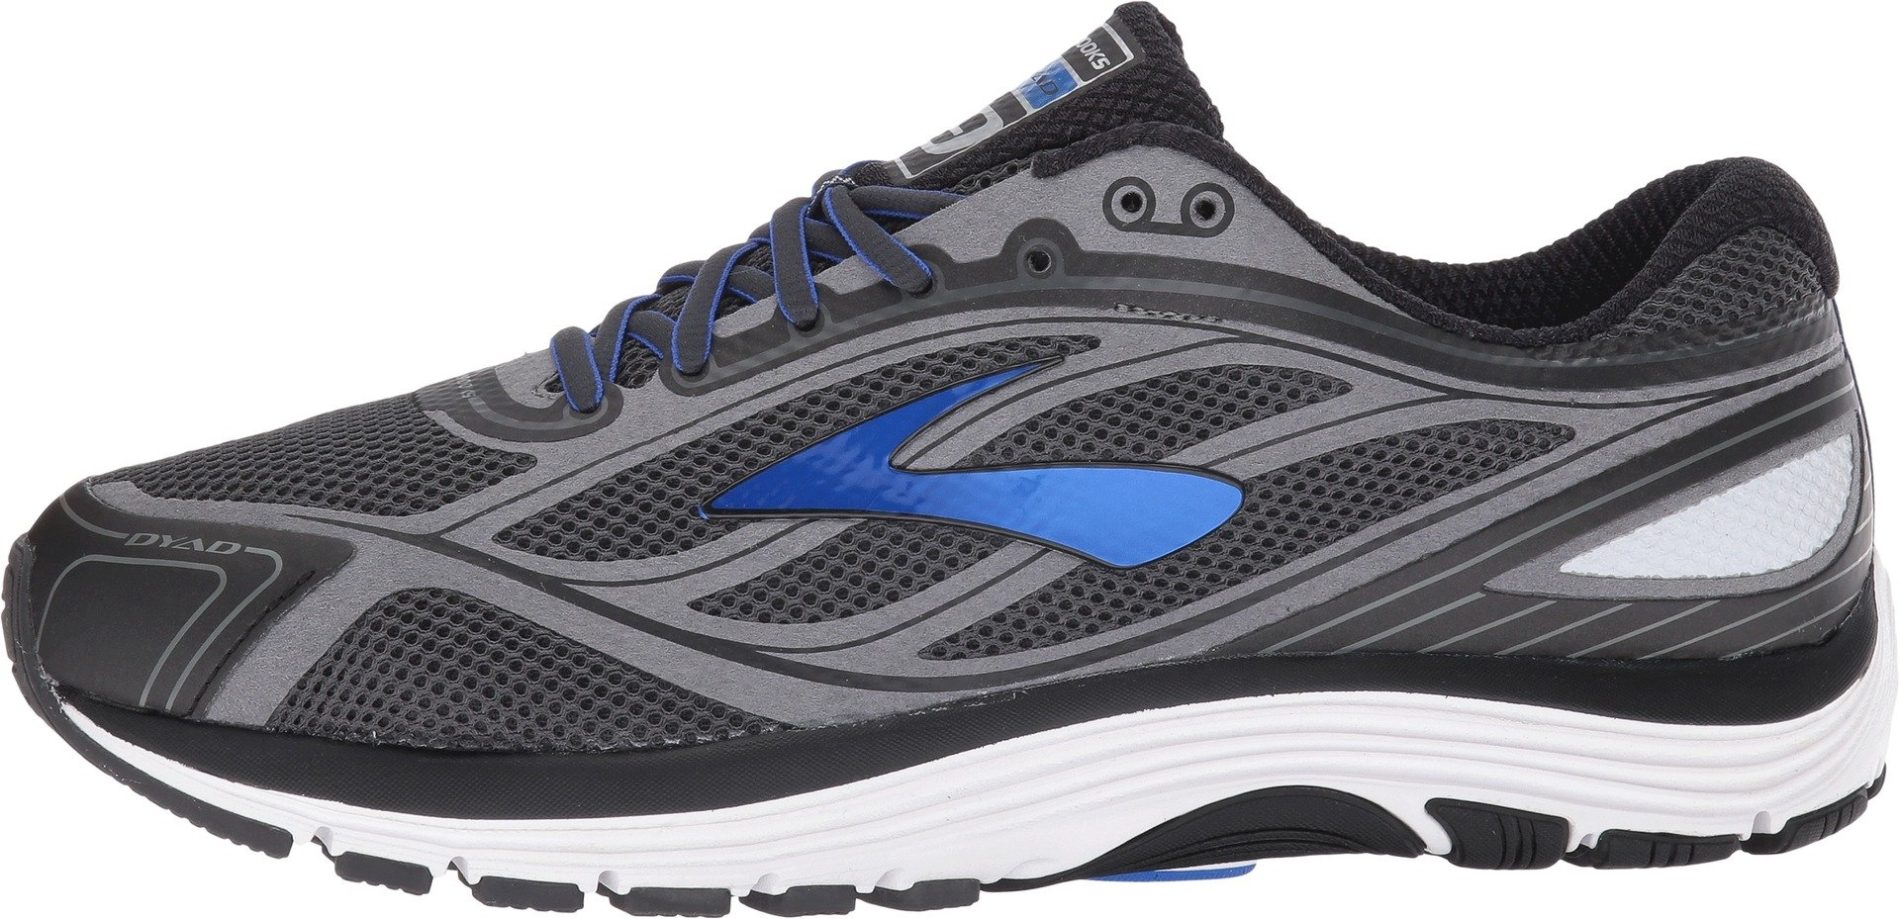 Only £96 + Review of Brooks Dyad 9 